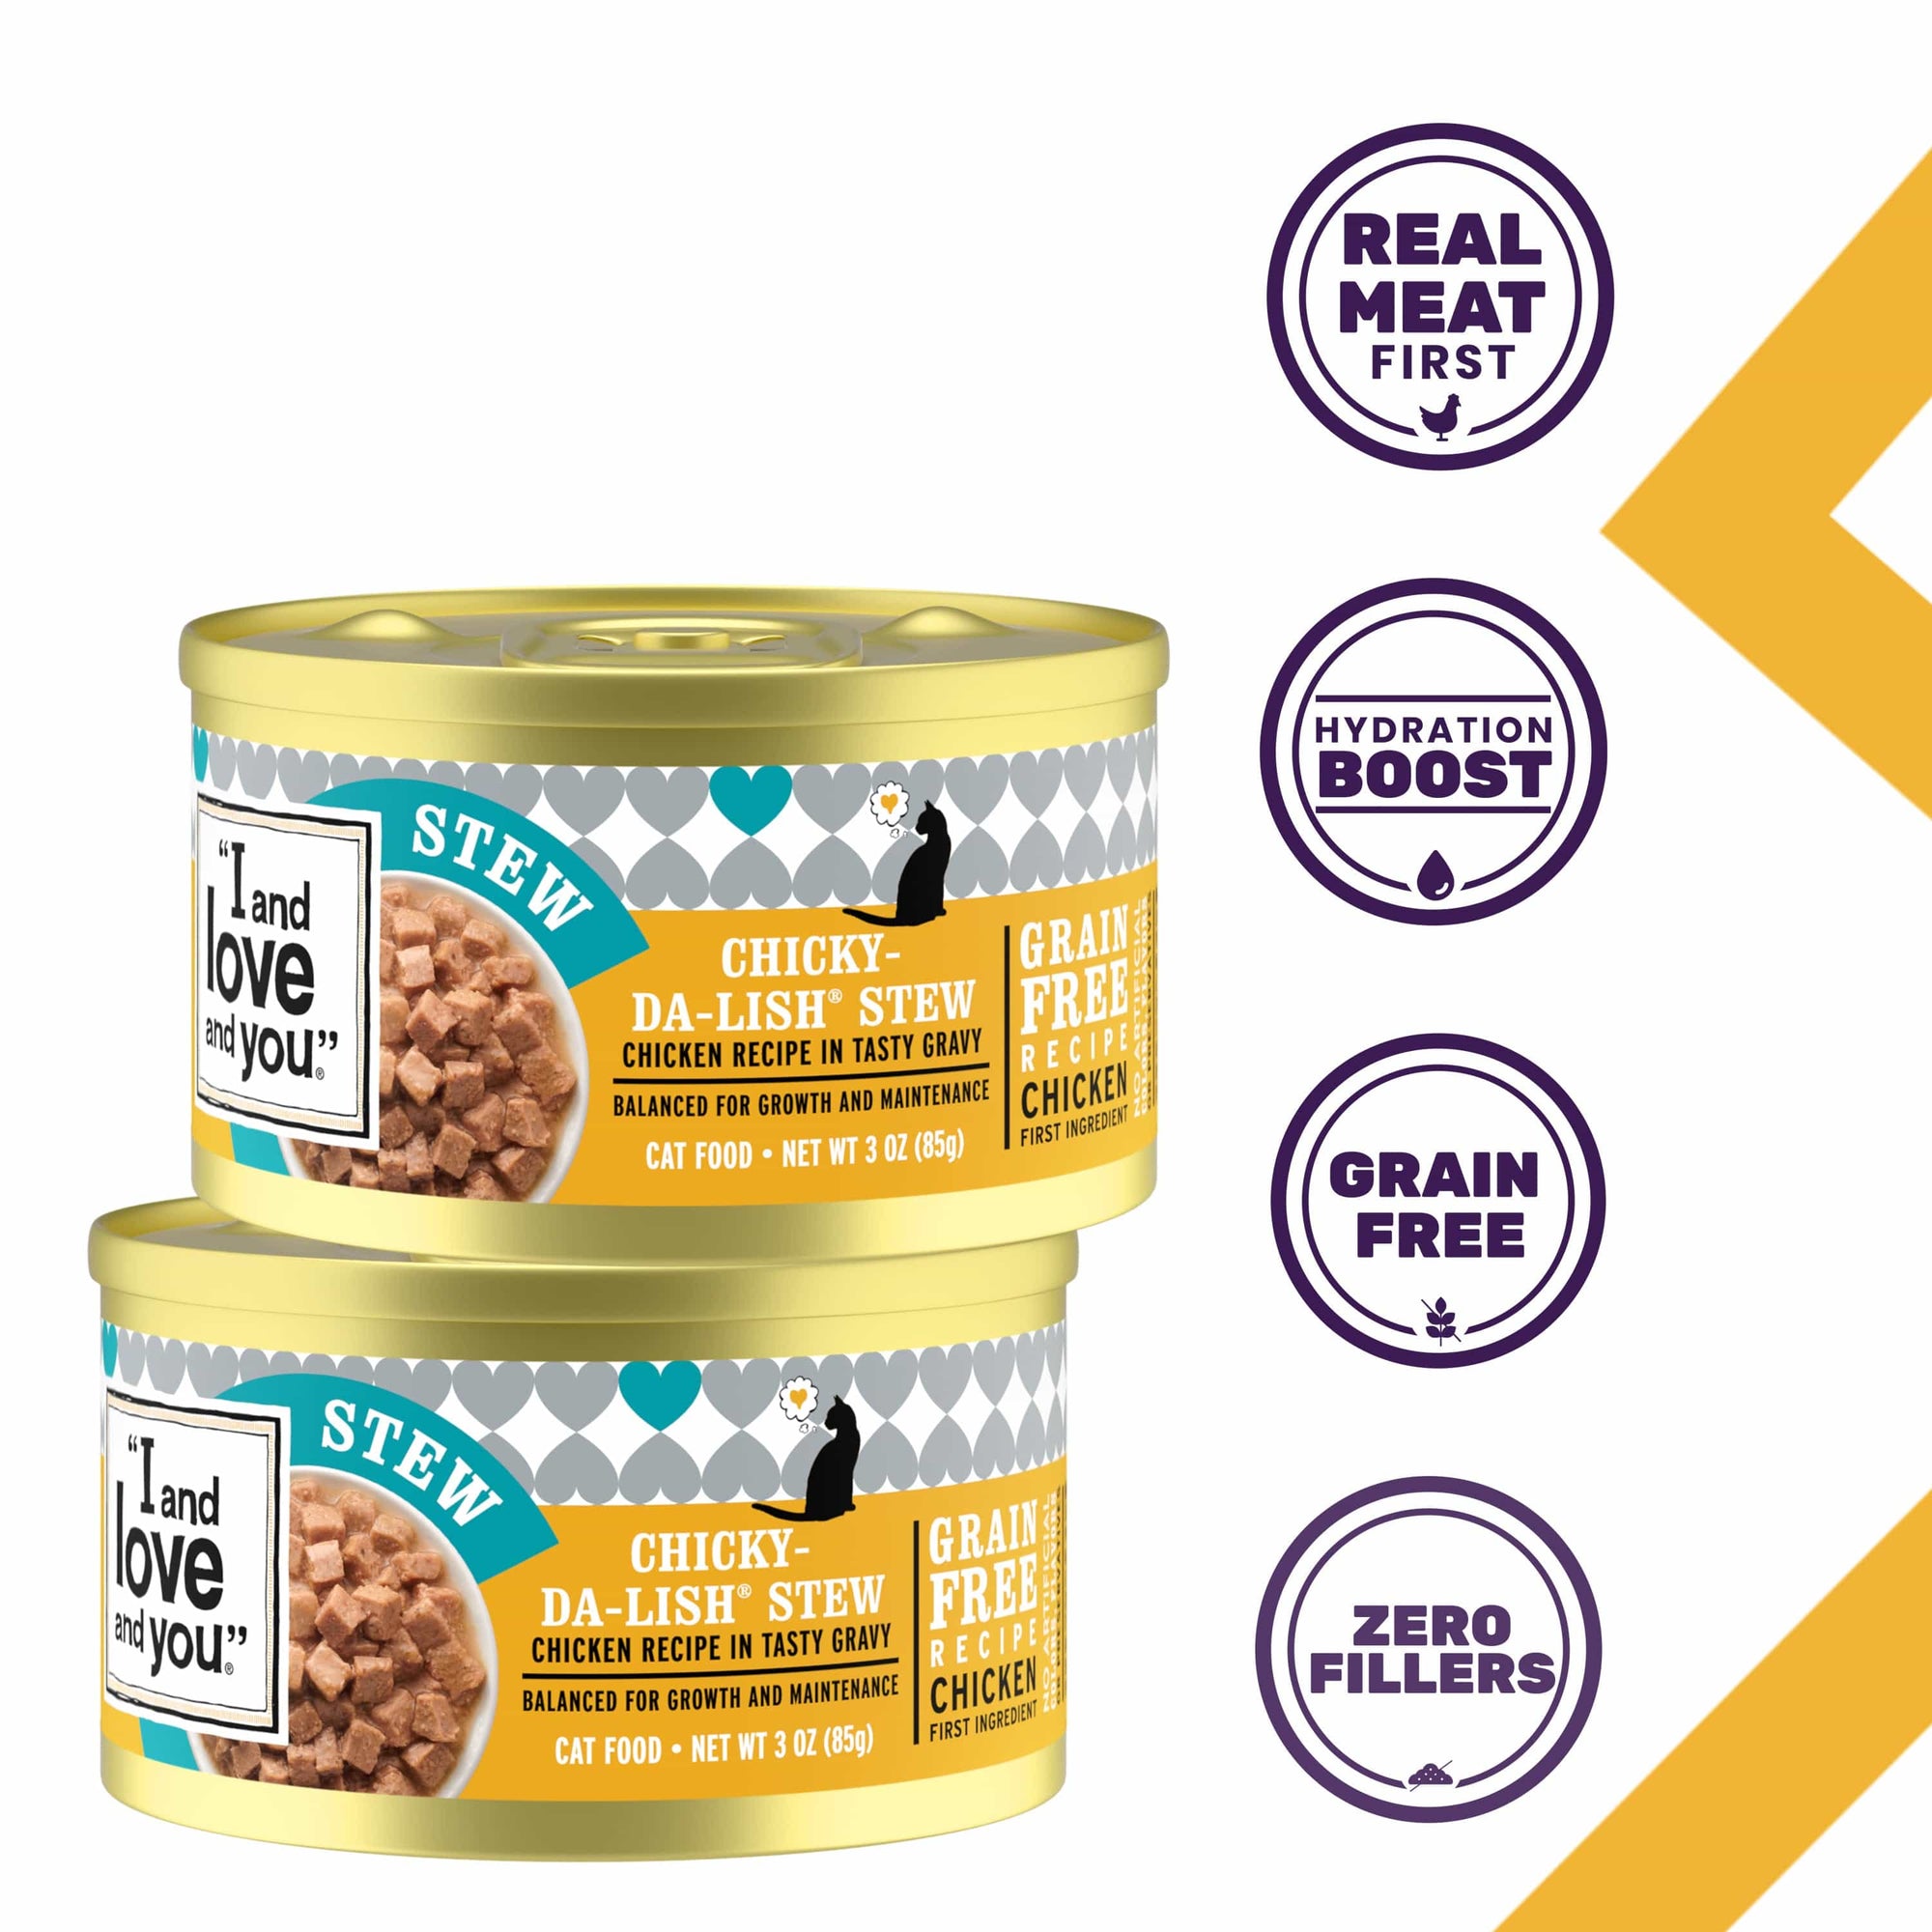 Cans of Chicky-Da-Lish Stew cat food, showcasing product features such as real meat first, hydration boost, grain free and zero fillers.